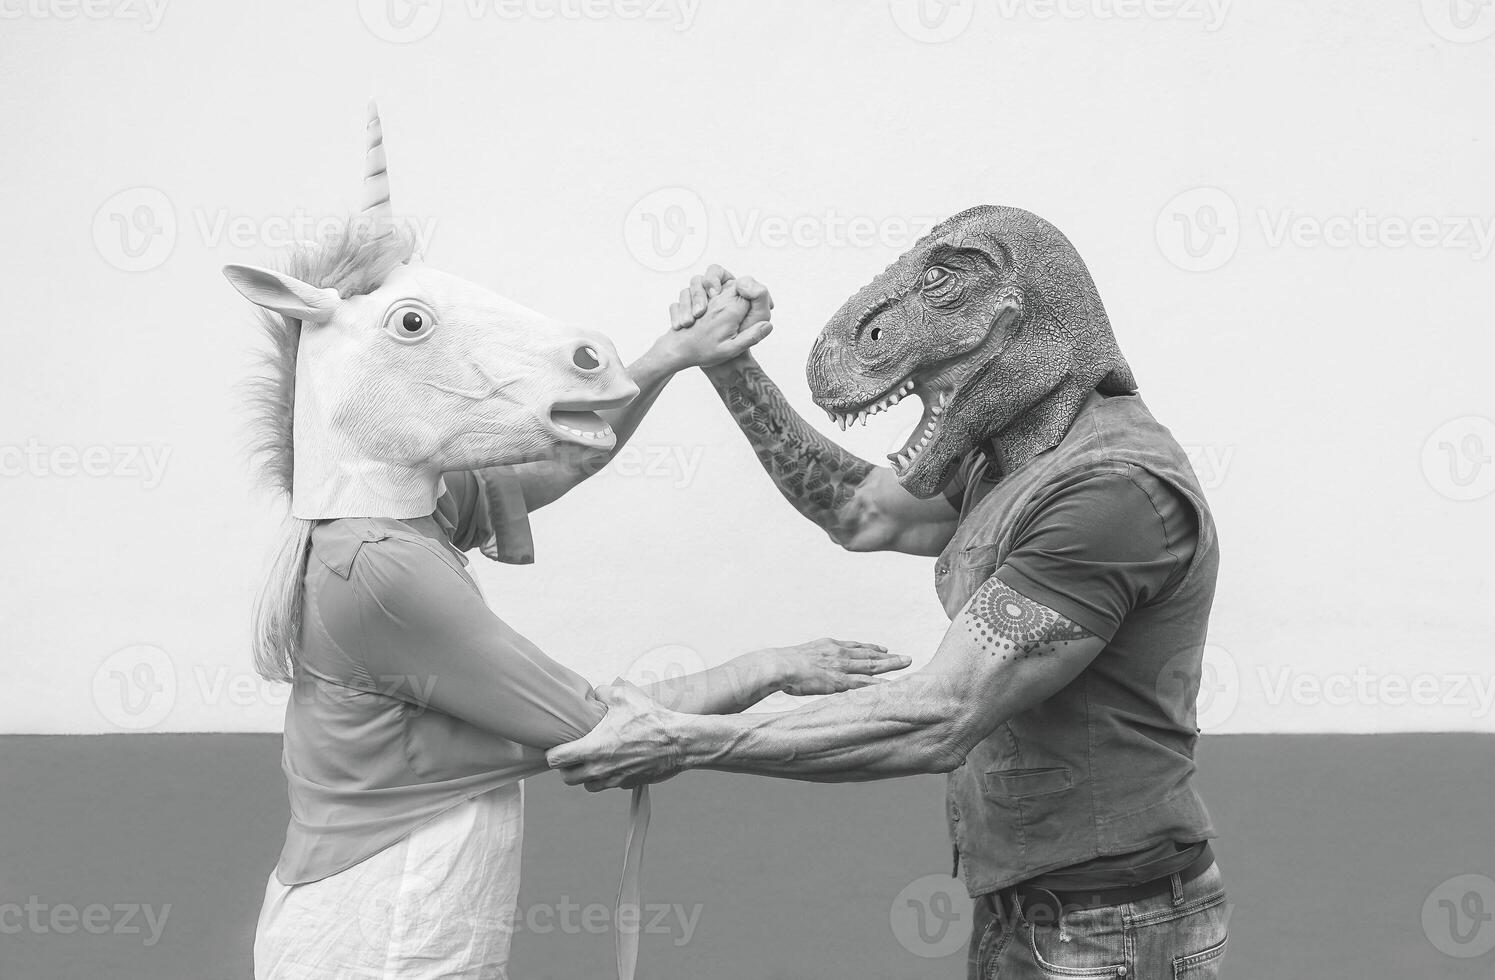 Crazy couple dancing and wearing dinosaur and unicorn mask - Senior trendy people having fun masked at carnival parade - Absurd, eccentric, surreal, fest and funny masquerade concept photo